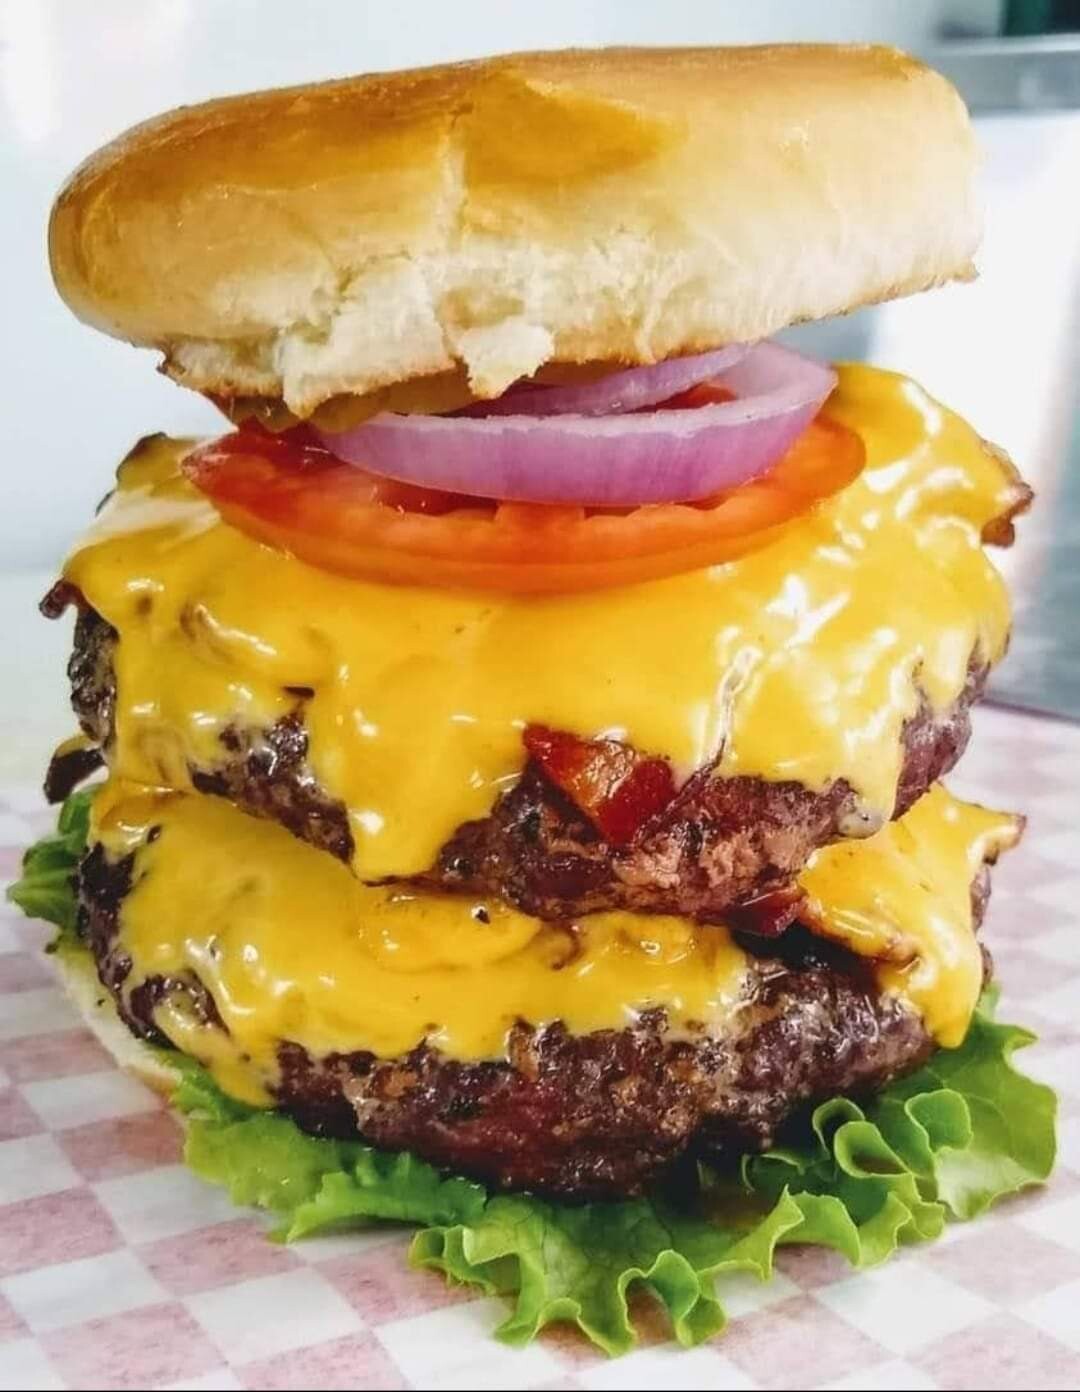 DOUBLE BACON CHEESEBURGER WITH FRIES